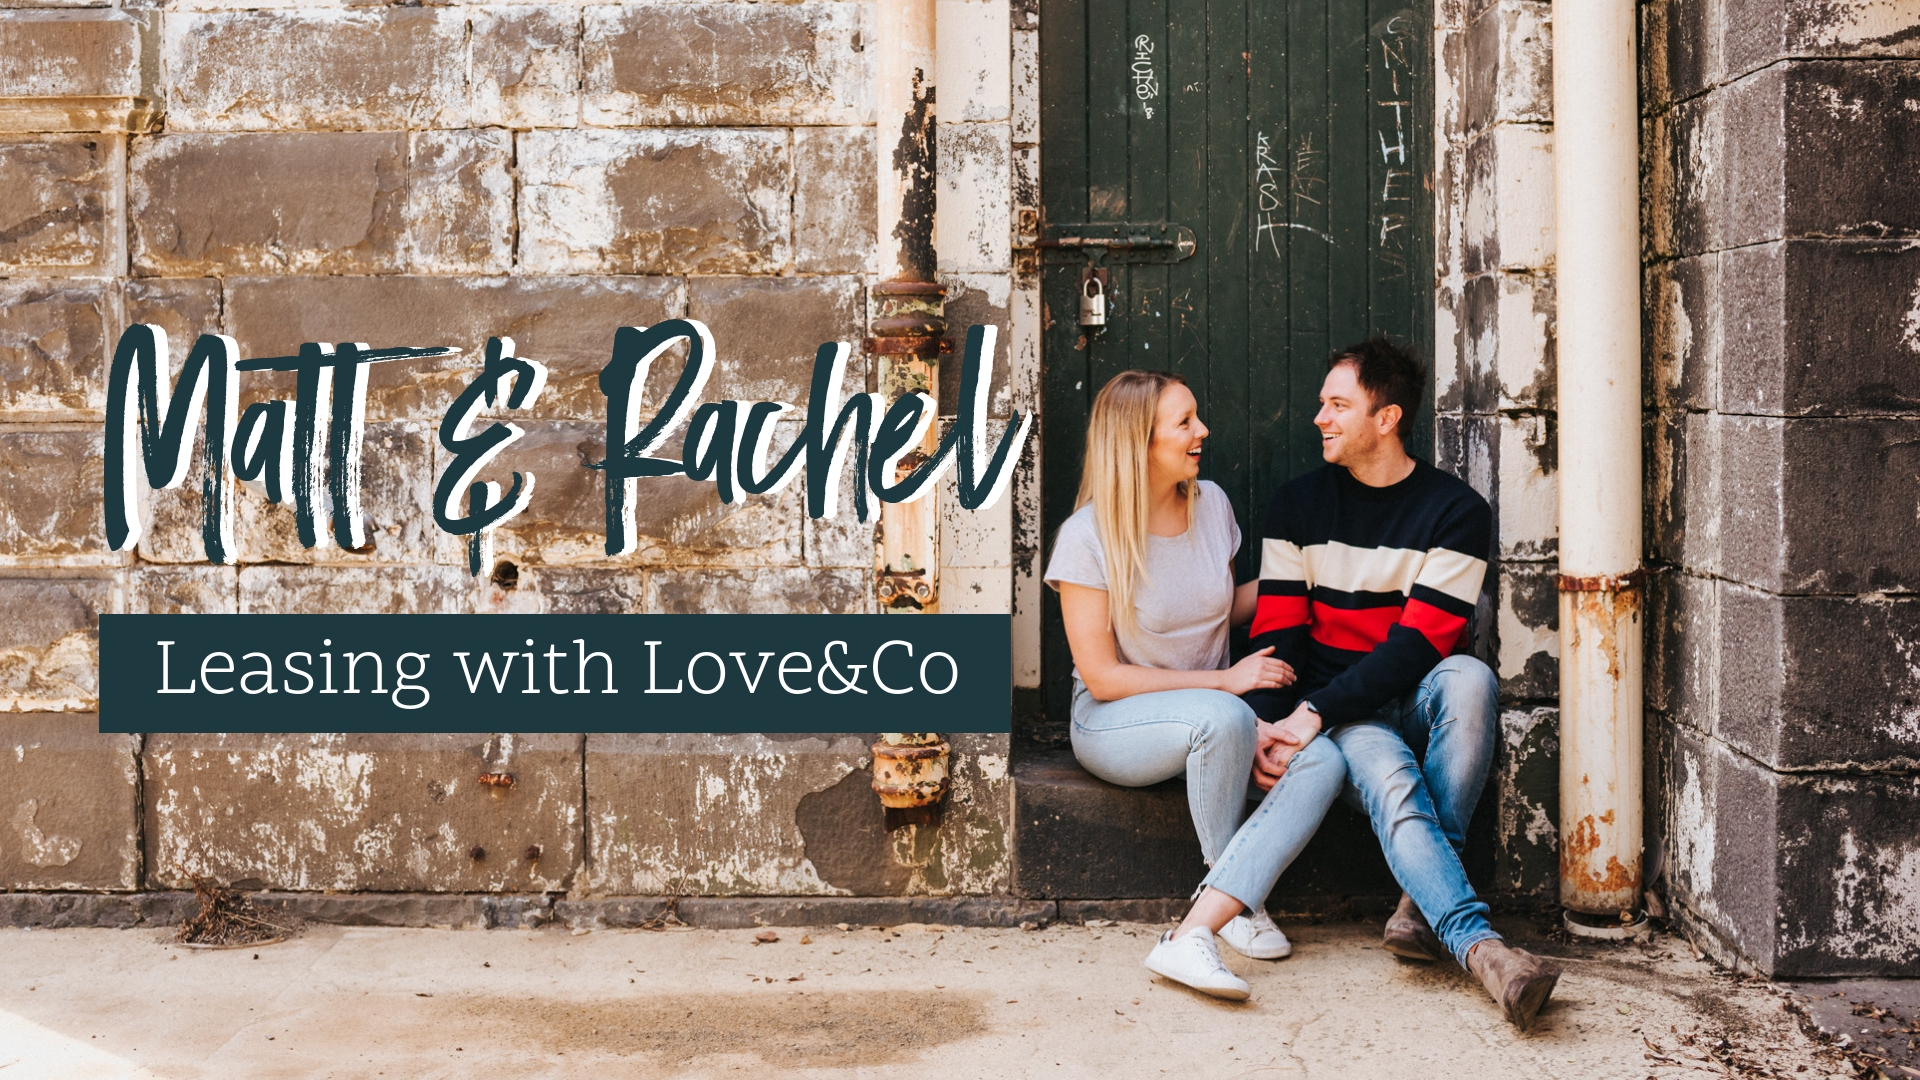 Leasing With Love&Co: Matt and Rachel’s Story